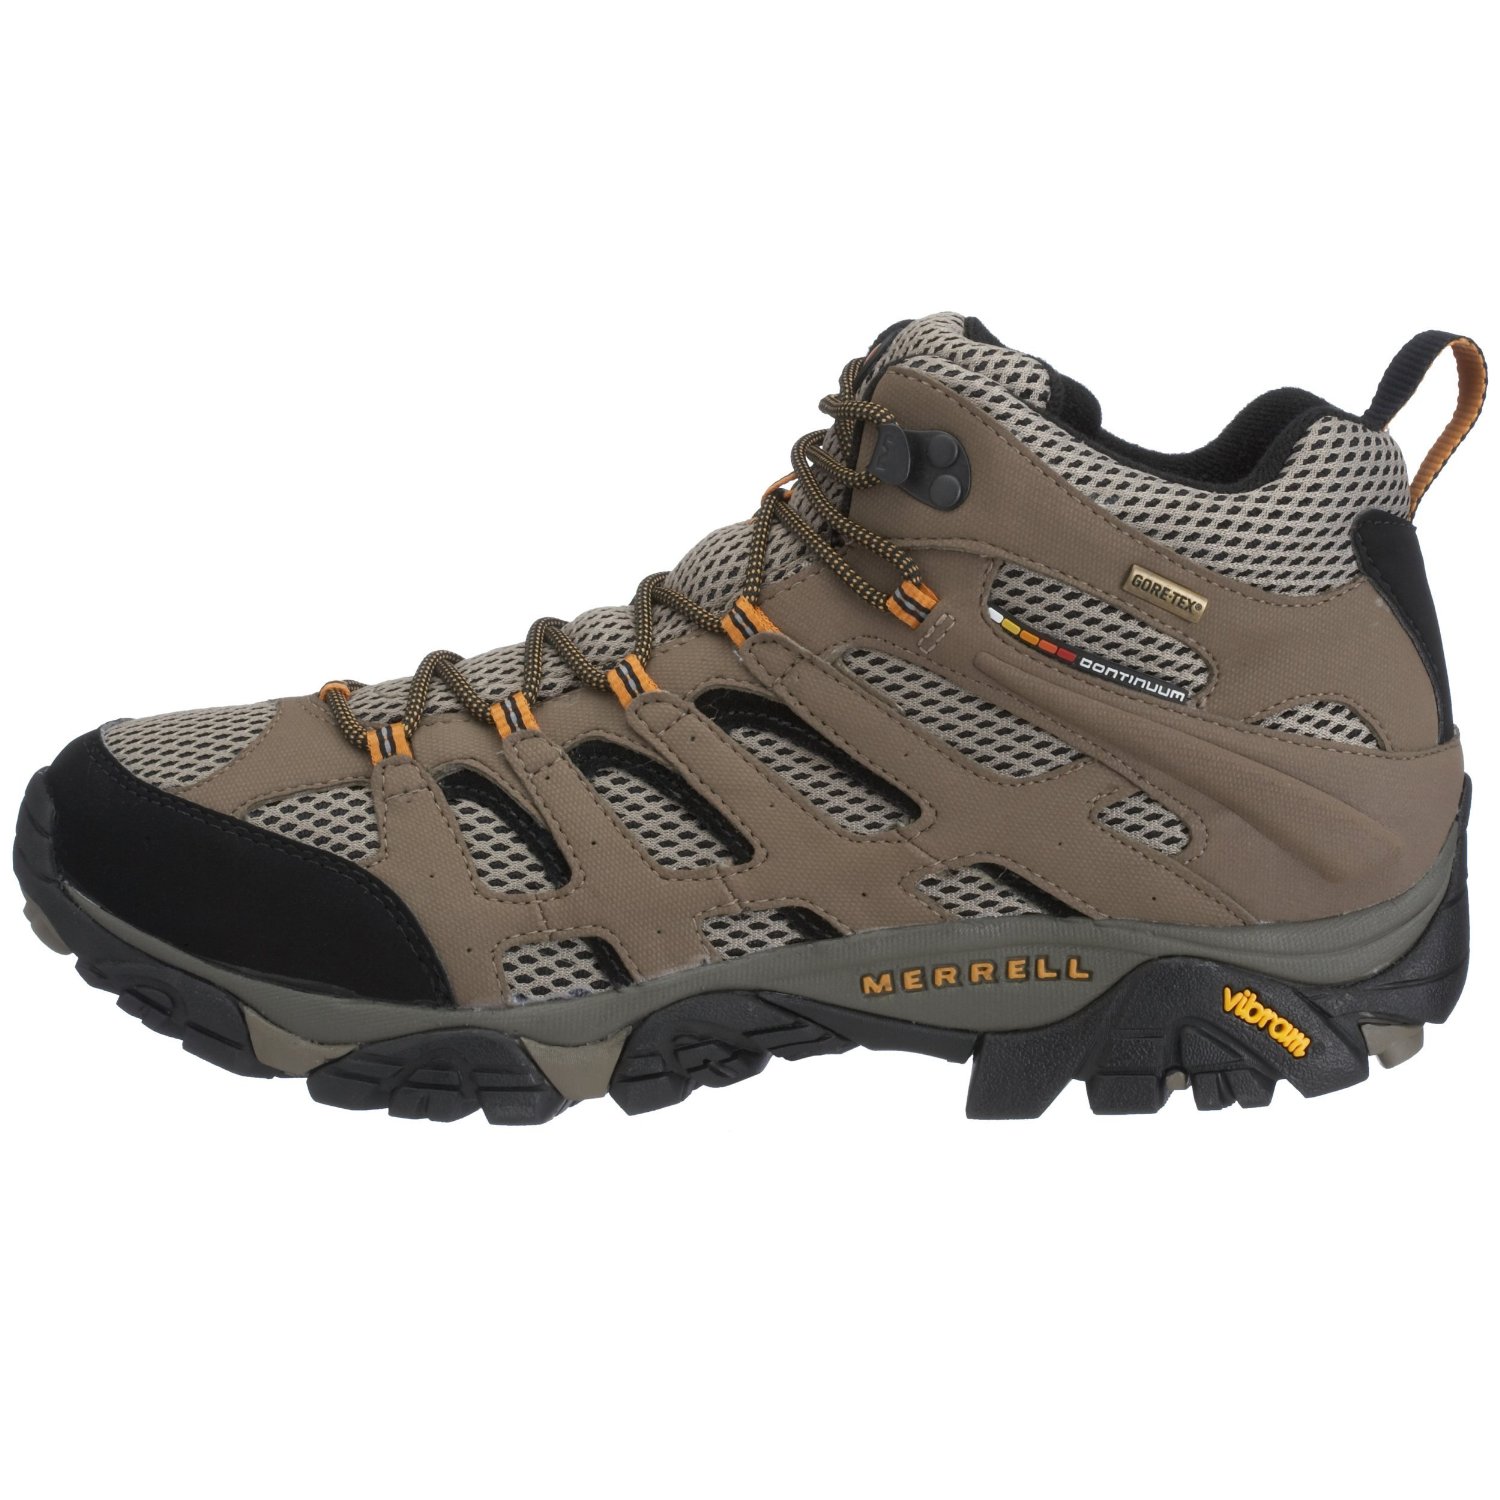 Hiking Shoes Here: Merrell Men's Moab Mid GORE-TEX XCR Hiking Boot